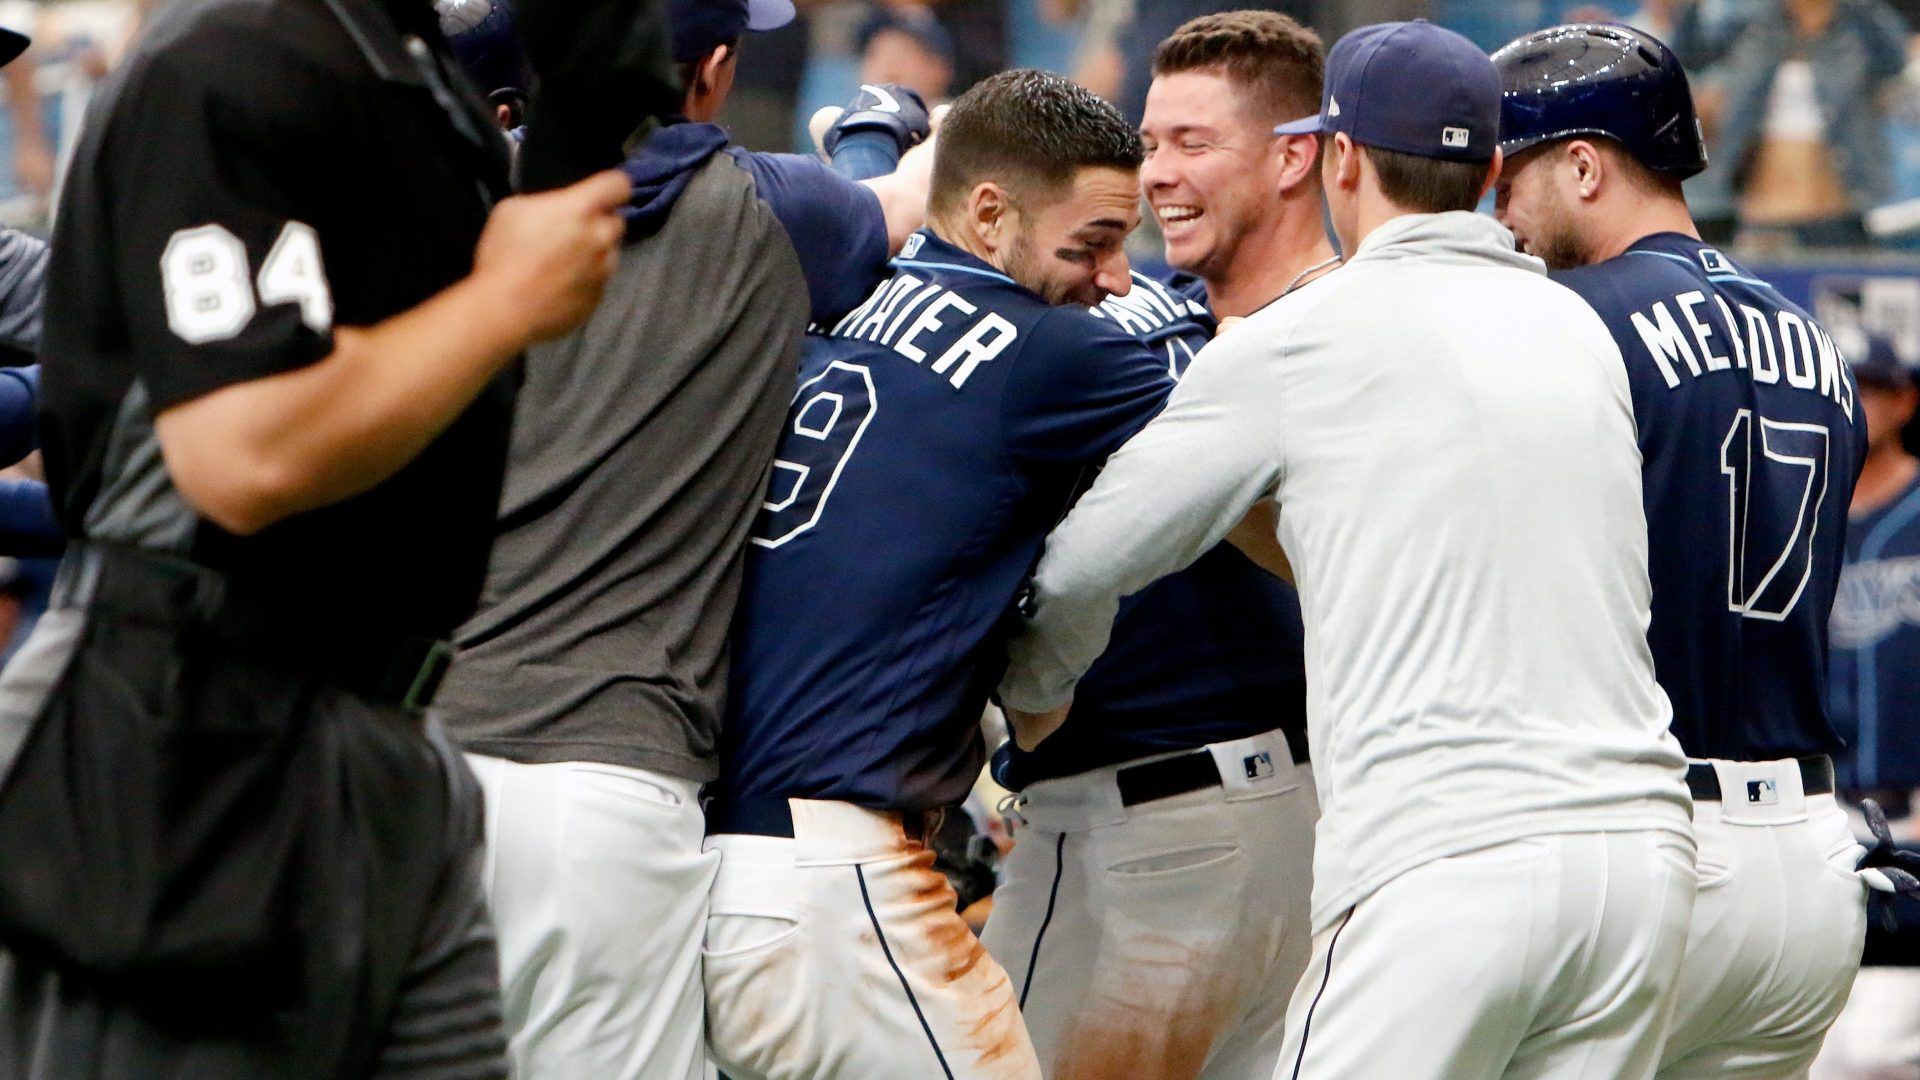 Mariners lose on walk-off wild pitch